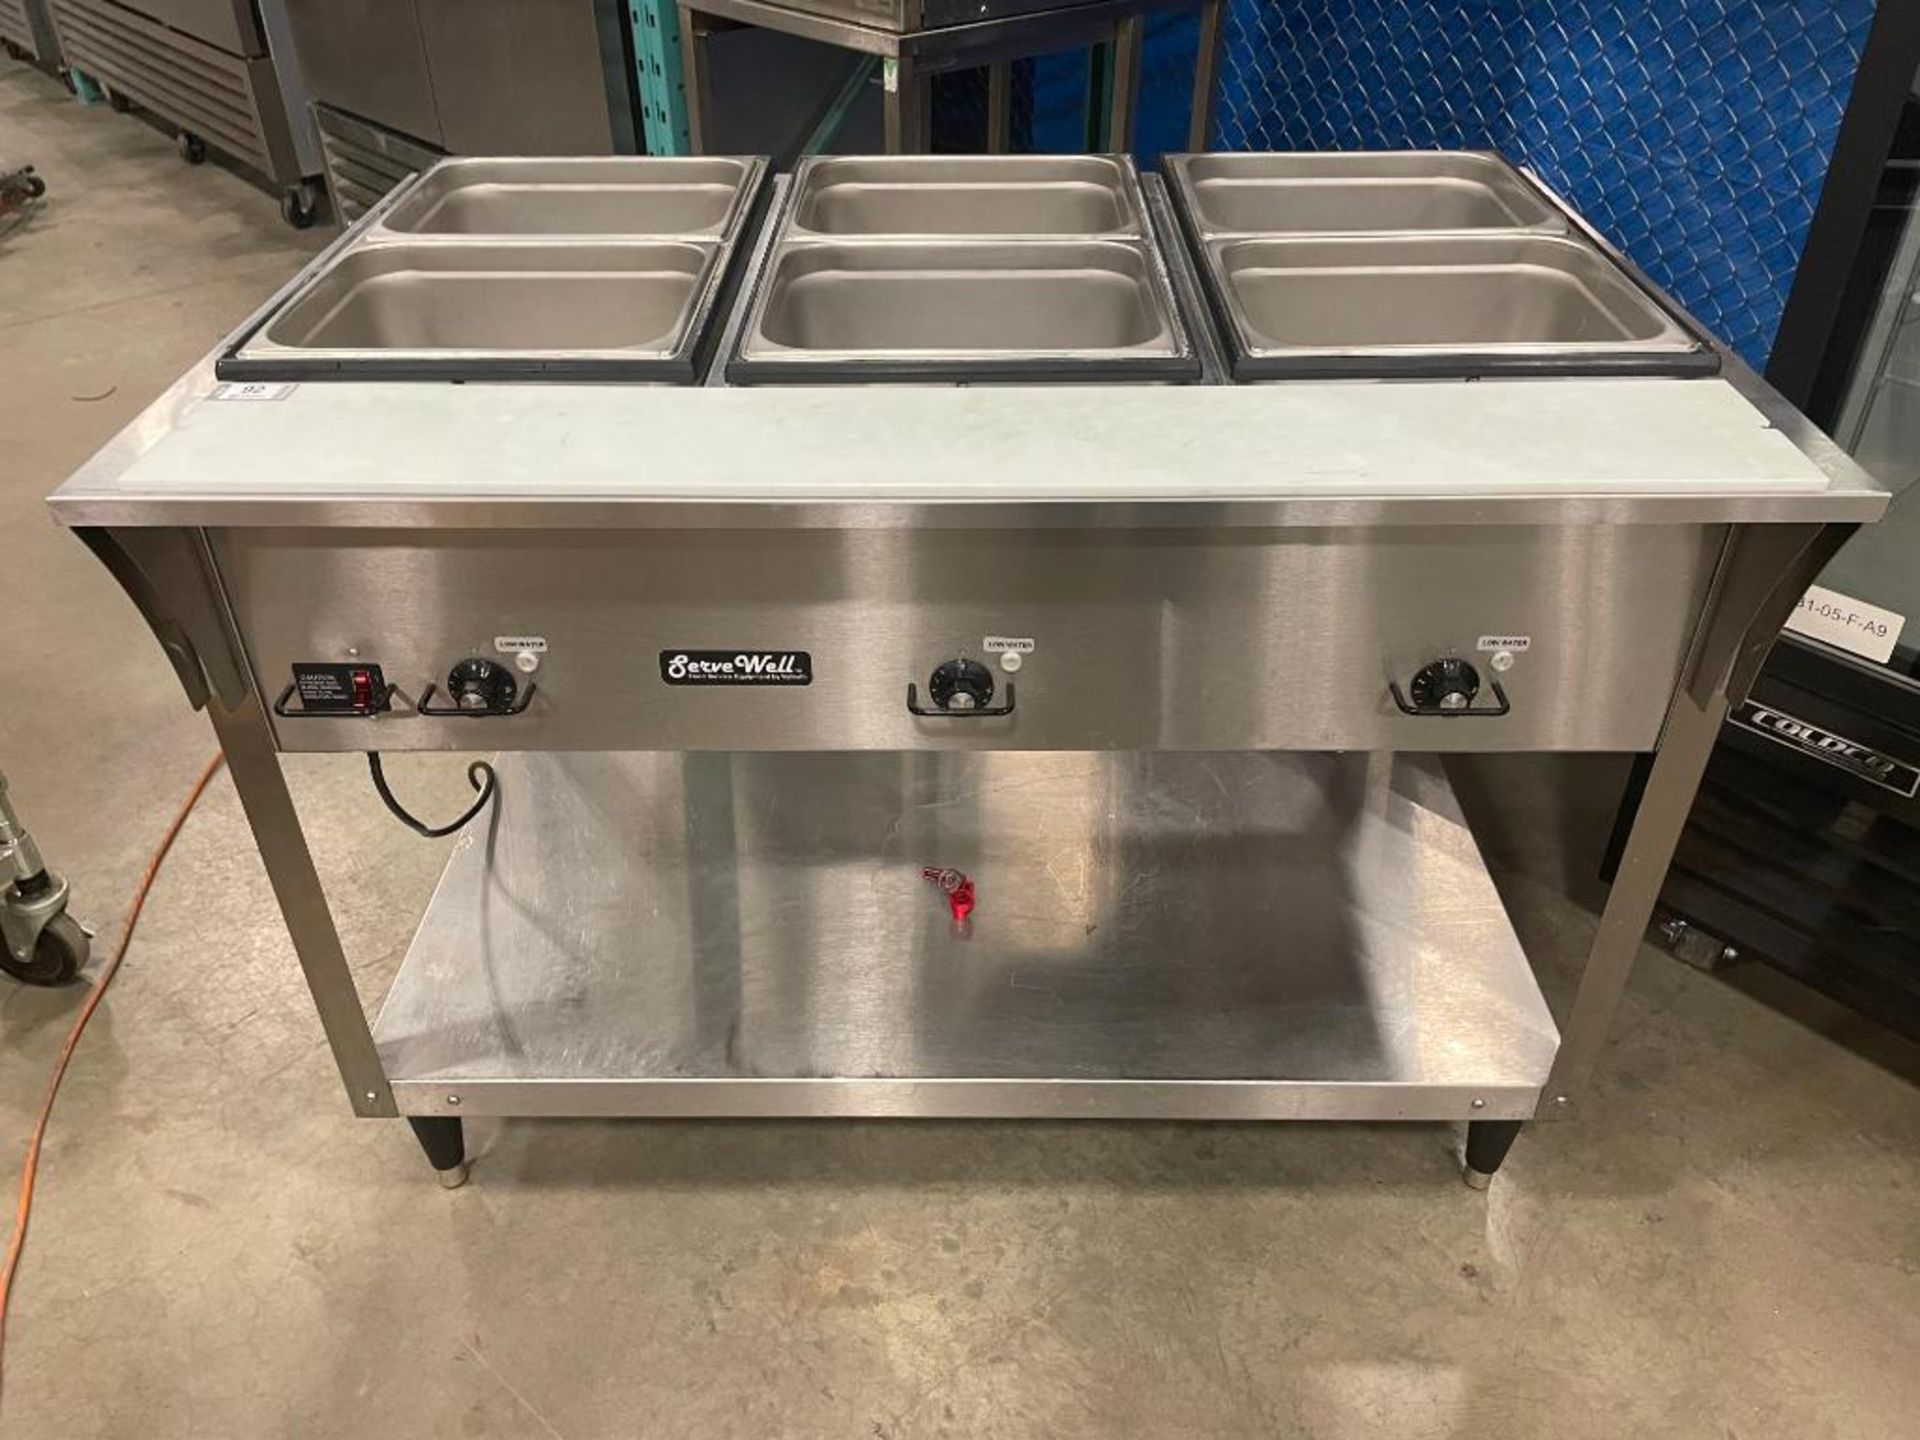 VOLLRATH SERVE WELL 3-WELL STEAM TABLE - Image 10 of 11